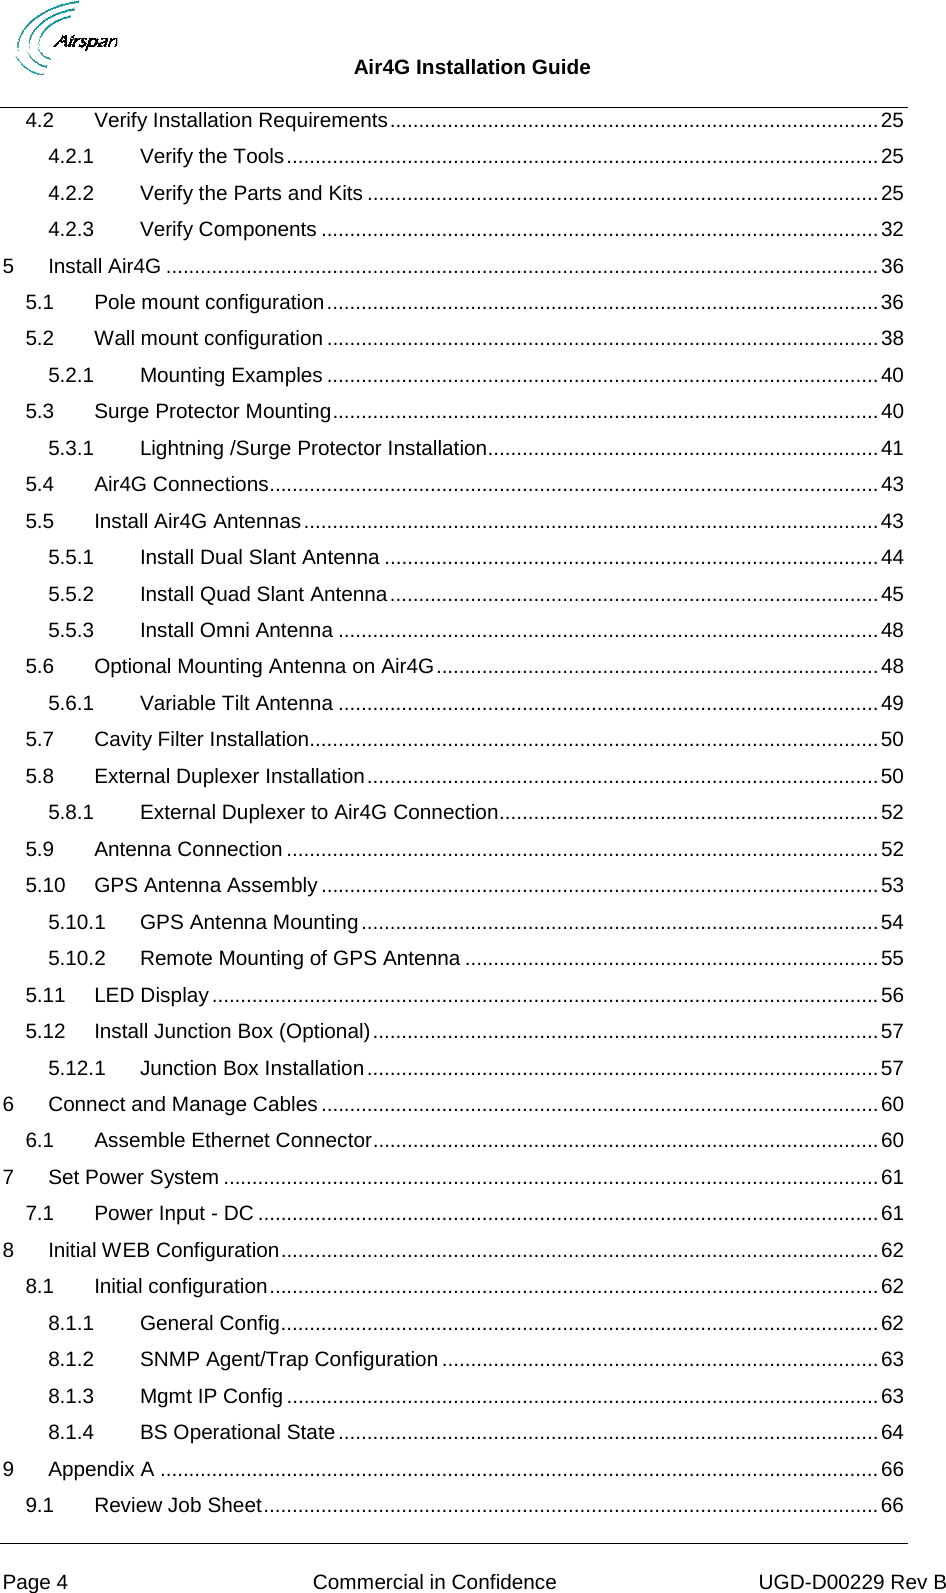  Air4G Installation Guide     Page 4  Commercial in Confidence UGD-D00229 Rev B 4.2 Verify Installation Requirements ..................................................................................... 25 4.2.1 Verify the Tools ....................................................................................................... 25 4.2.2 Verify the Parts and Kits ......................................................................................... 25 4.2.3 Verify Components ................................................................................................. 32 5 Install Air4G ............................................................................................................................ 36 5.1 Pole mount configuration ................................................................................................ 36 5.2 Wall mount configuration ................................................................................................ 38 5.2.1 Mounting Examples ................................................................................................ 40 5.3 Surge Protector Mounting ............................................................................................... 40 5.3.1 Lightning /Surge Protector Installation .................................................................... 41 5.4 Air4G Connections .......................................................................................................... 43 5.5 Install Air4G Antennas .................................................................................................... 43 5.5.1 Install Dual Slant Antenna ...................................................................................... 44 5.5.2 Install Quad Slant Antenna ..................................................................................... 45 5.5.3 Install Omni Antenna .............................................................................................. 48 5.6 Optional Mounting Antenna on Air4G ............................................................................. 48 5.6.1 Variable Tilt Antenna .............................................................................................. 49 5.7 Cavity Filter Installation................................................................................................... 50 5.8 External Duplexer Installation ......................................................................................... 50 5.8.1 External Duplexer to Air4G Connection .................................................................. 52 5.9 Antenna Connection ....................................................................................................... 52 5.10 GPS Antenna Assembly ................................................................................................. 53 5.10.1 GPS Antenna Mounting .......................................................................................... 54 5.10.2 Remote Mounting of GPS Antenna ........................................................................ 55 5.11 LED Display .................................................................................................................... 56 5.12 Install Junction Box (Optional) ........................................................................................ 57 5.12.1 Junction Box Installation ......................................................................................... 57 6 Connect and Manage Cables ................................................................................................. 60 6.1 Assemble Ethernet Connector ........................................................................................ 60 7 Set Power System .................................................................................................................. 61 7.1 Power Input - DC ............................................................................................................ 61 8 Initial WEB Configuration ........................................................................................................ 62 8.1 Initial configuration .......................................................................................................... 62 8.1.1 General Config ........................................................................................................ 62 8.1.2 SNMP Agent/Trap Configuration ............................................................................ 63 8.1.3 Mgmt IP Config ....................................................................................................... 63 8.1.4 BS Operational State .............................................................................................. 64 9 Appendix A ............................................................................................................................. 66 9.1 Review Job Sheet ........................................................................................................... 66 